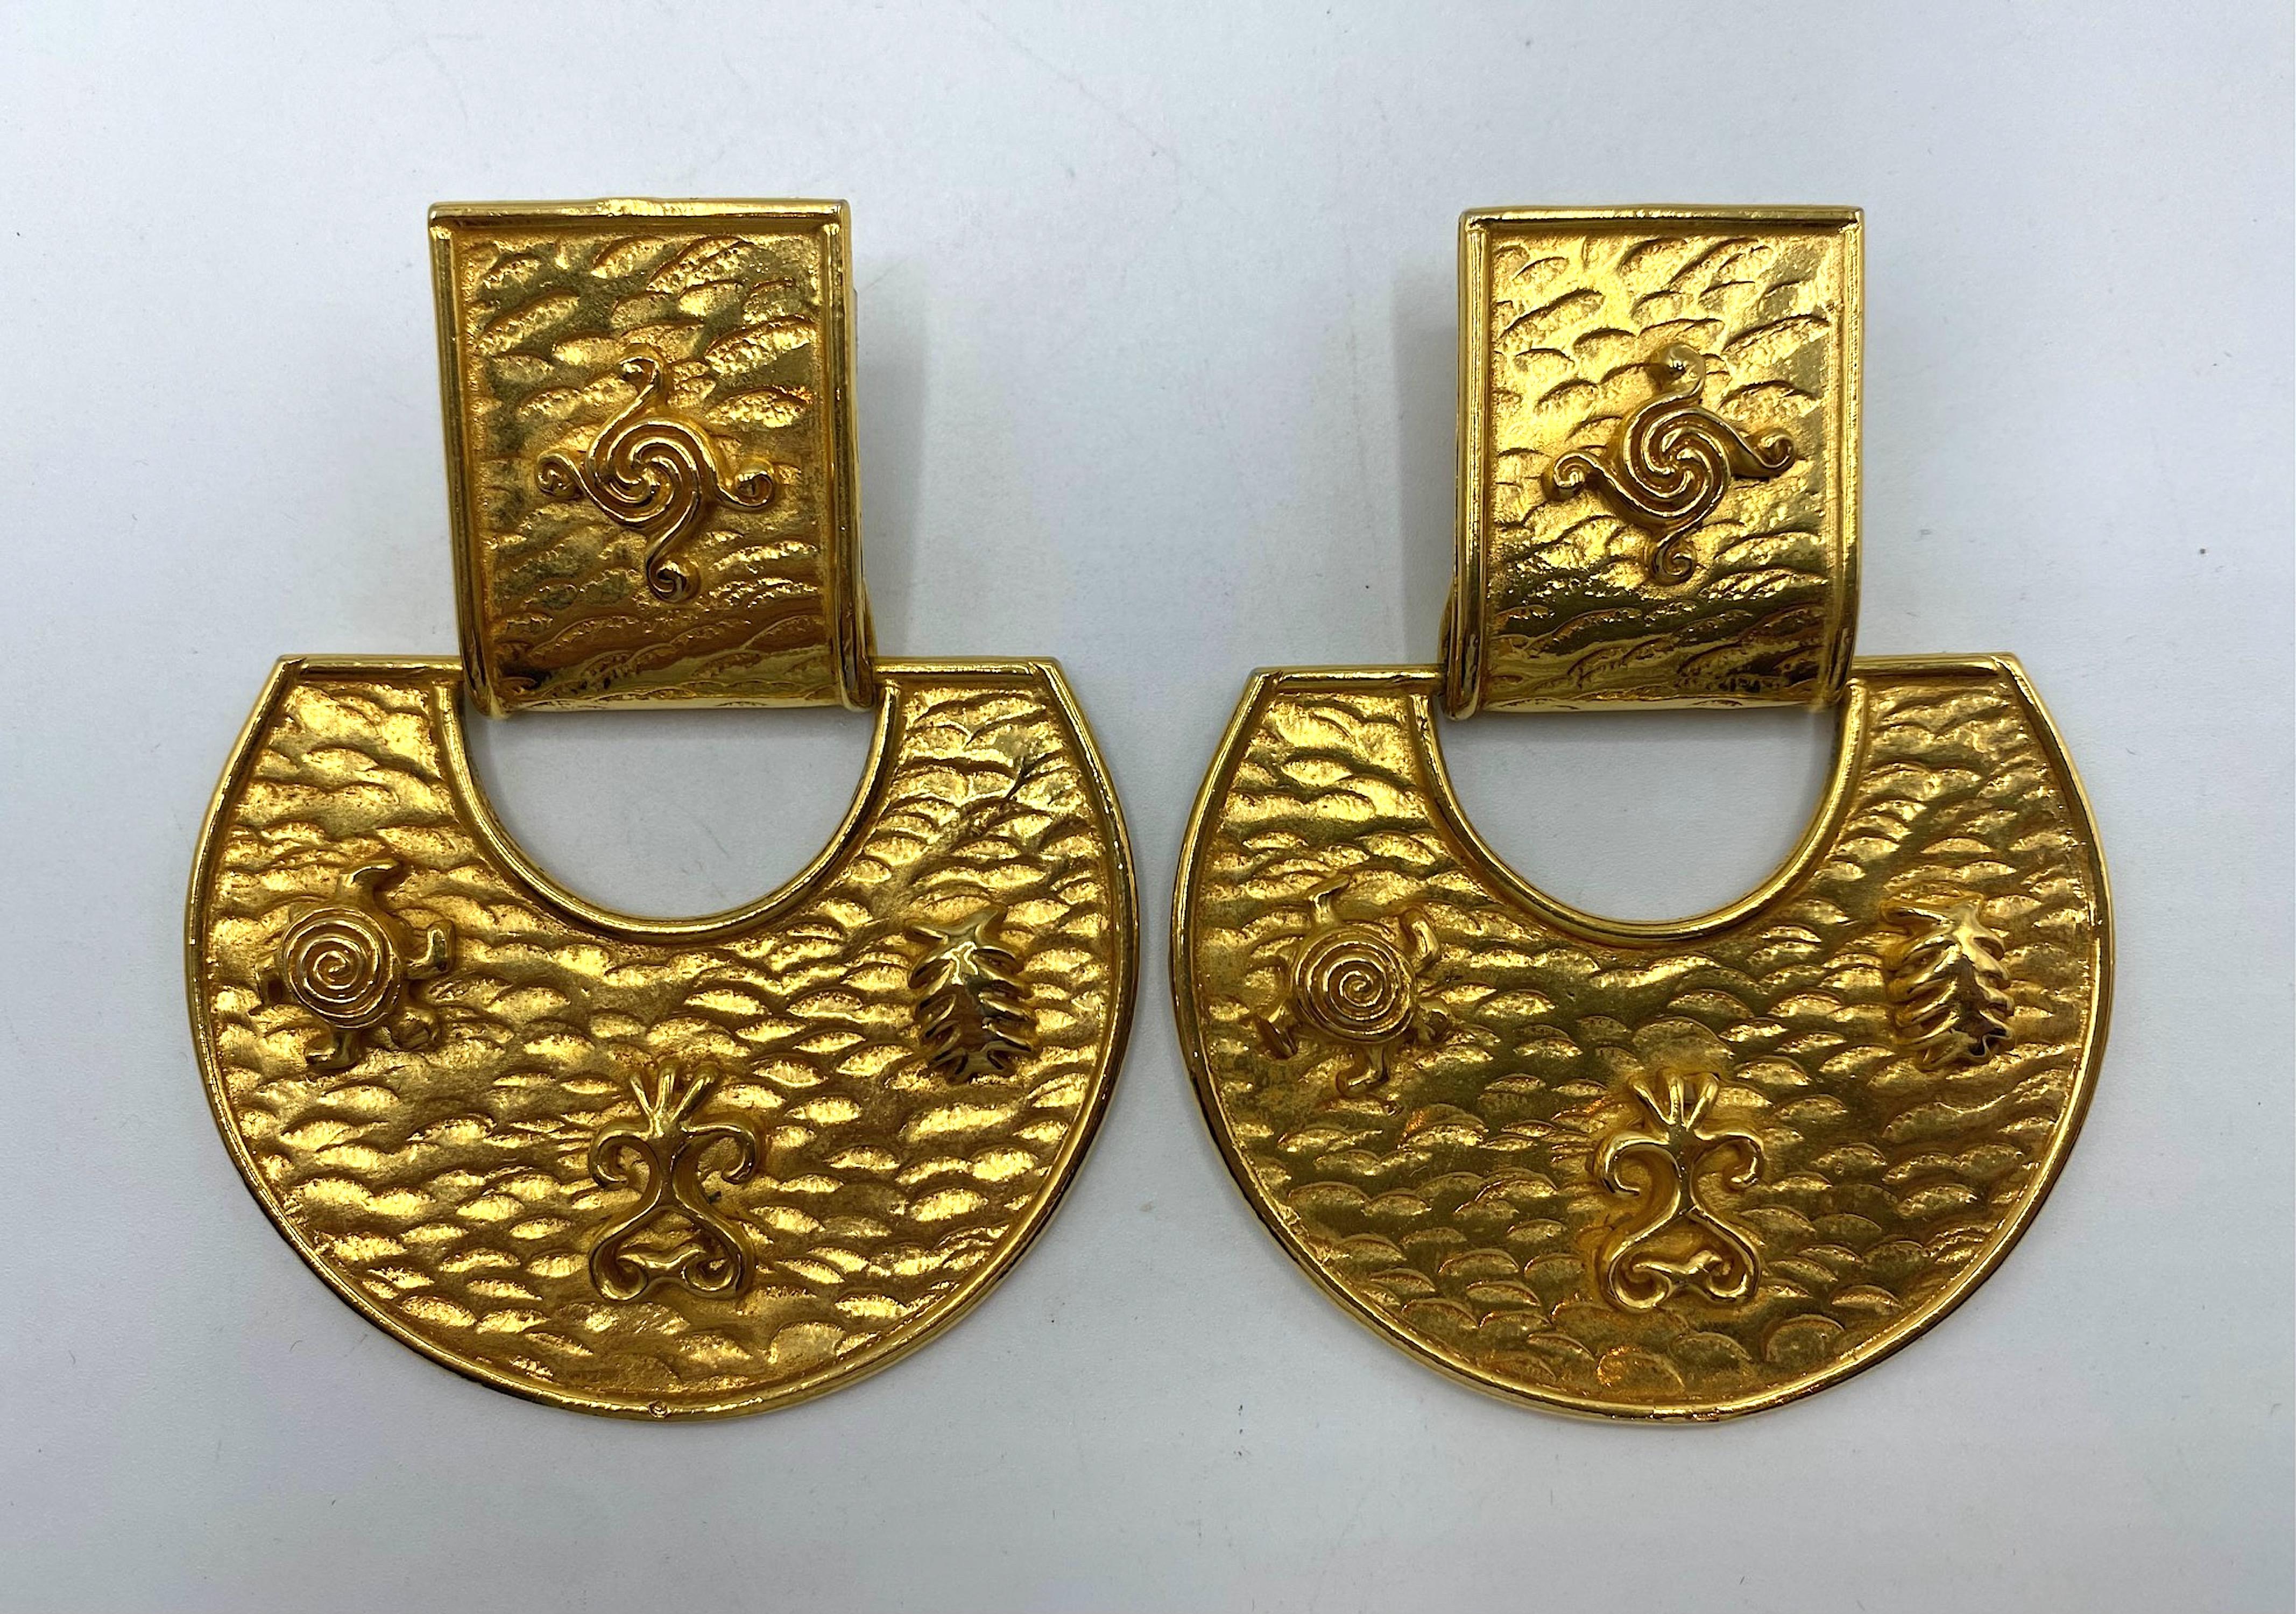 Presented is an amazing pair of 1980s large door knocker style earrings by French designer Dominique Aurientis. Beautifully constructed and richly plated in 18K gold. Each clip back earring measures approximately 2.38 inches wide and is 3 inches